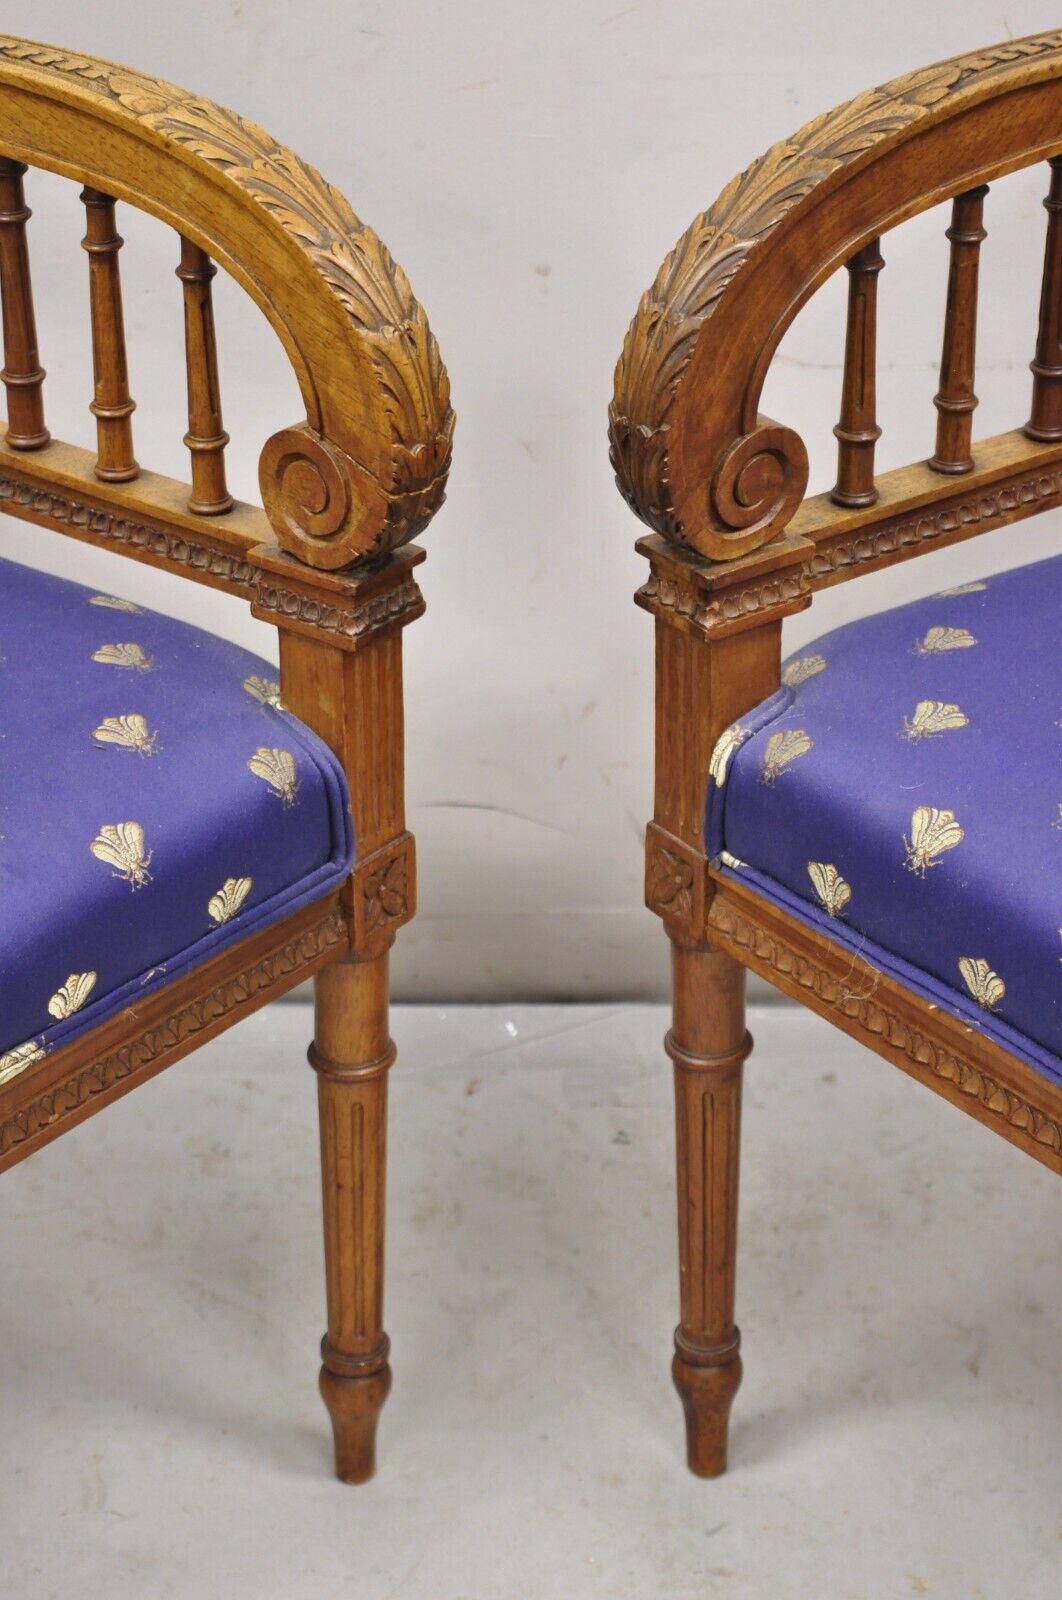 Antique French Louis XVI Style Carved Walnut Lyre Harp Corner Chairs - a Pair For Sale 4